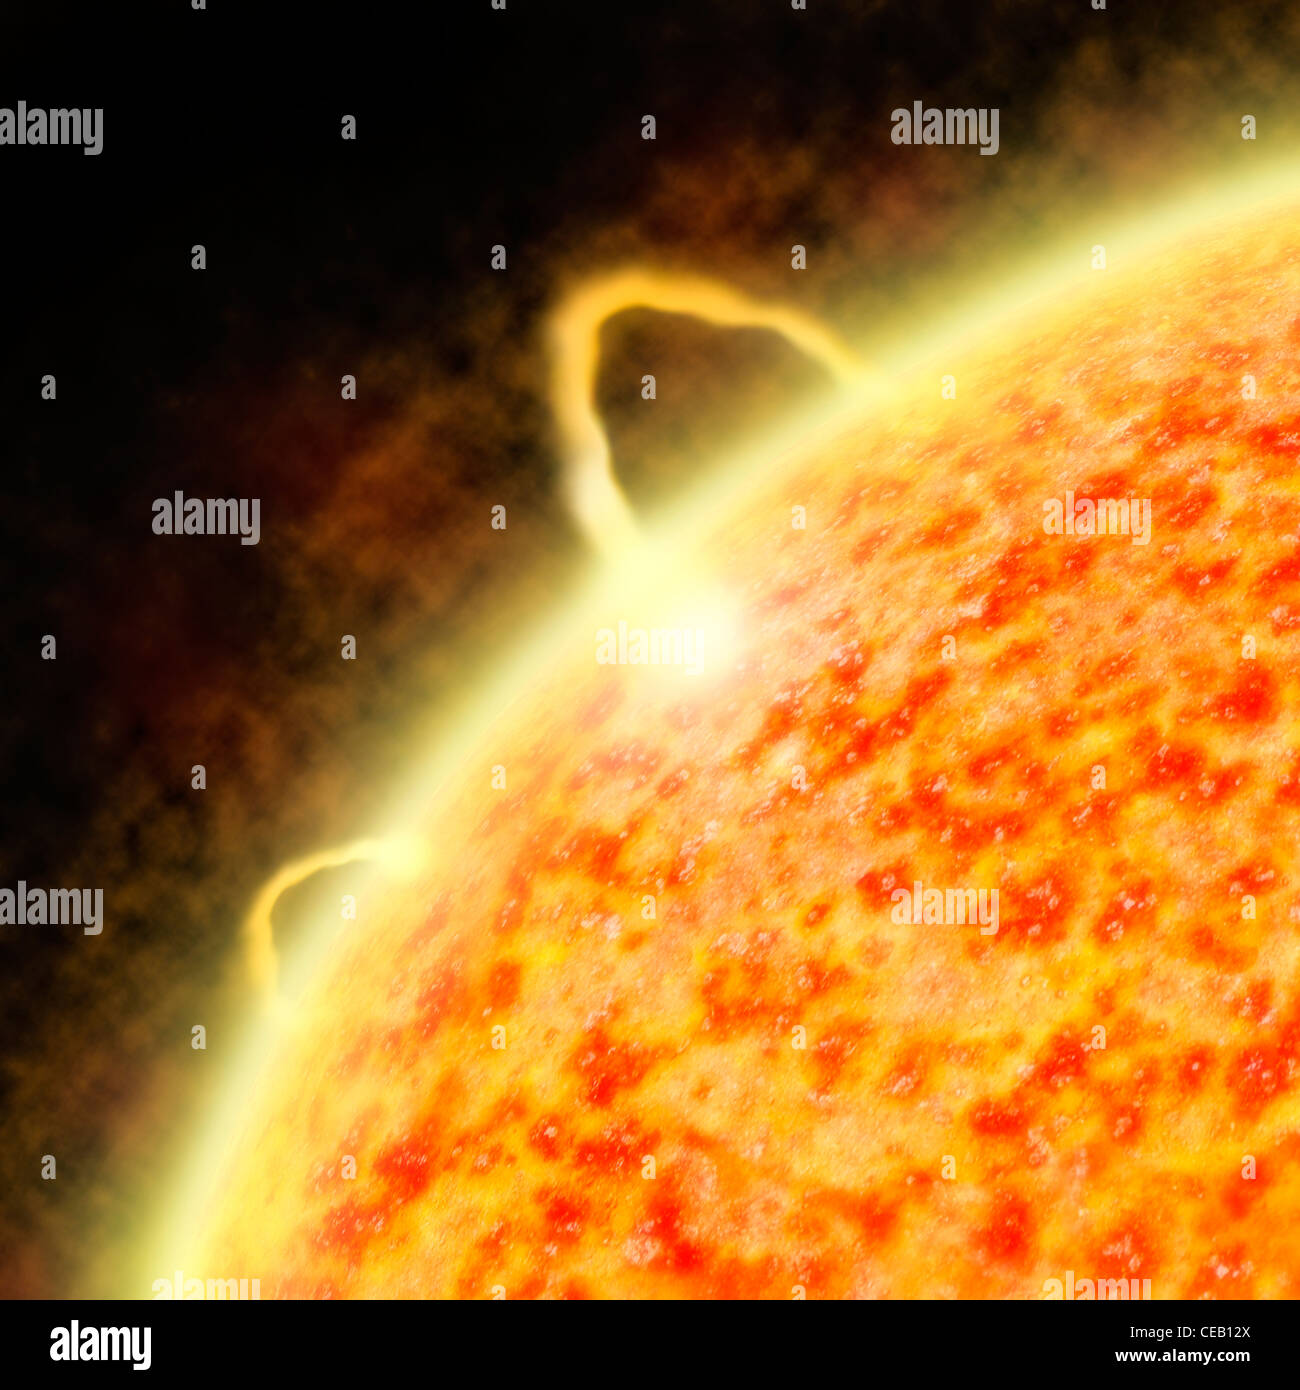 Illustration of a star's sunspot and solar flare activity Stock Photo